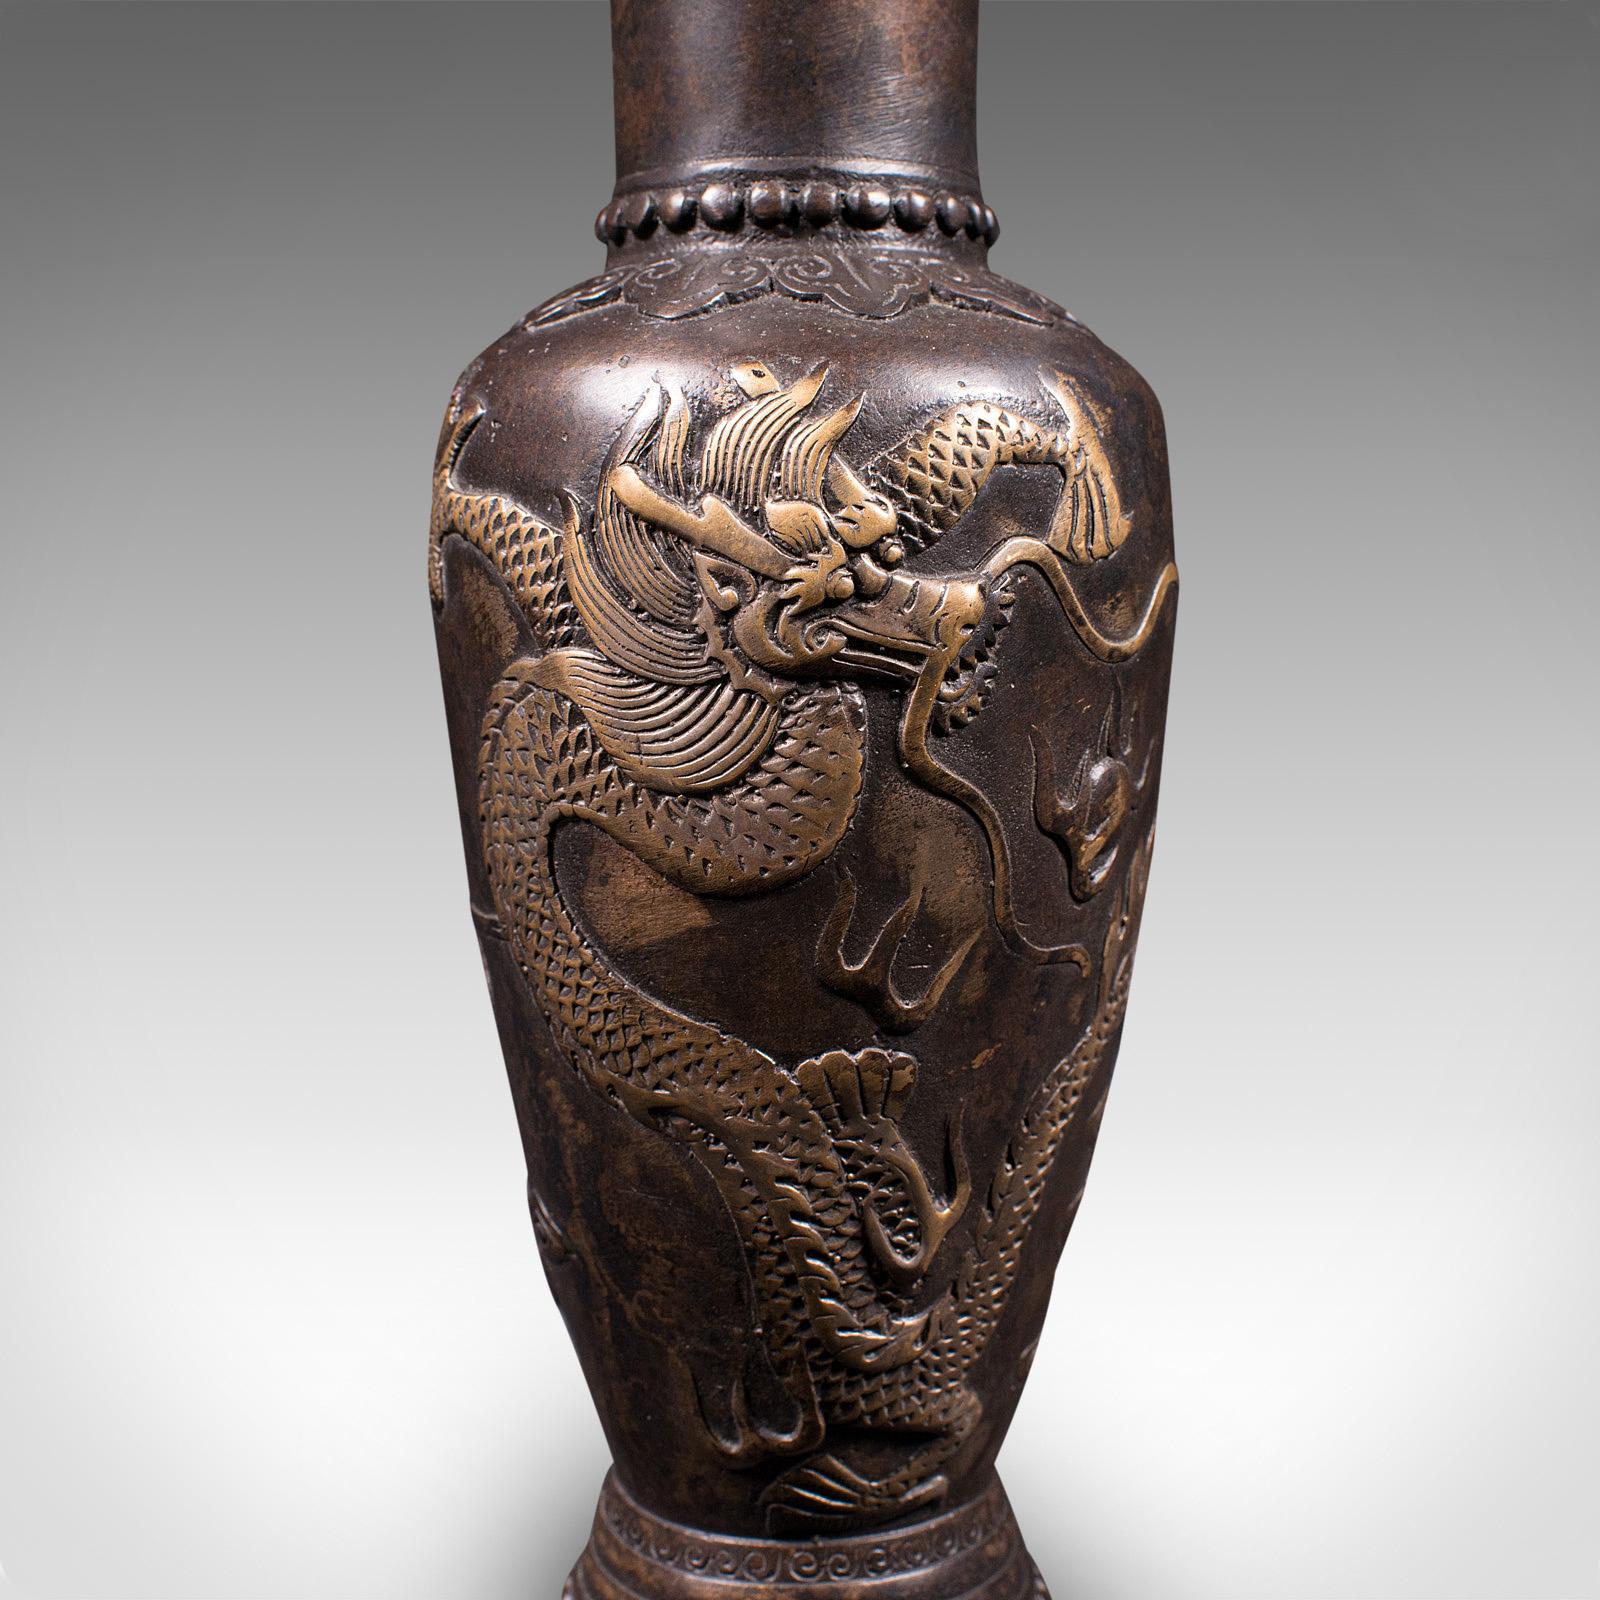 Small Antique Posy Vase, Chinese, Bronze, Decorative Flower Urn, Victorian, 1900 For Sale 2